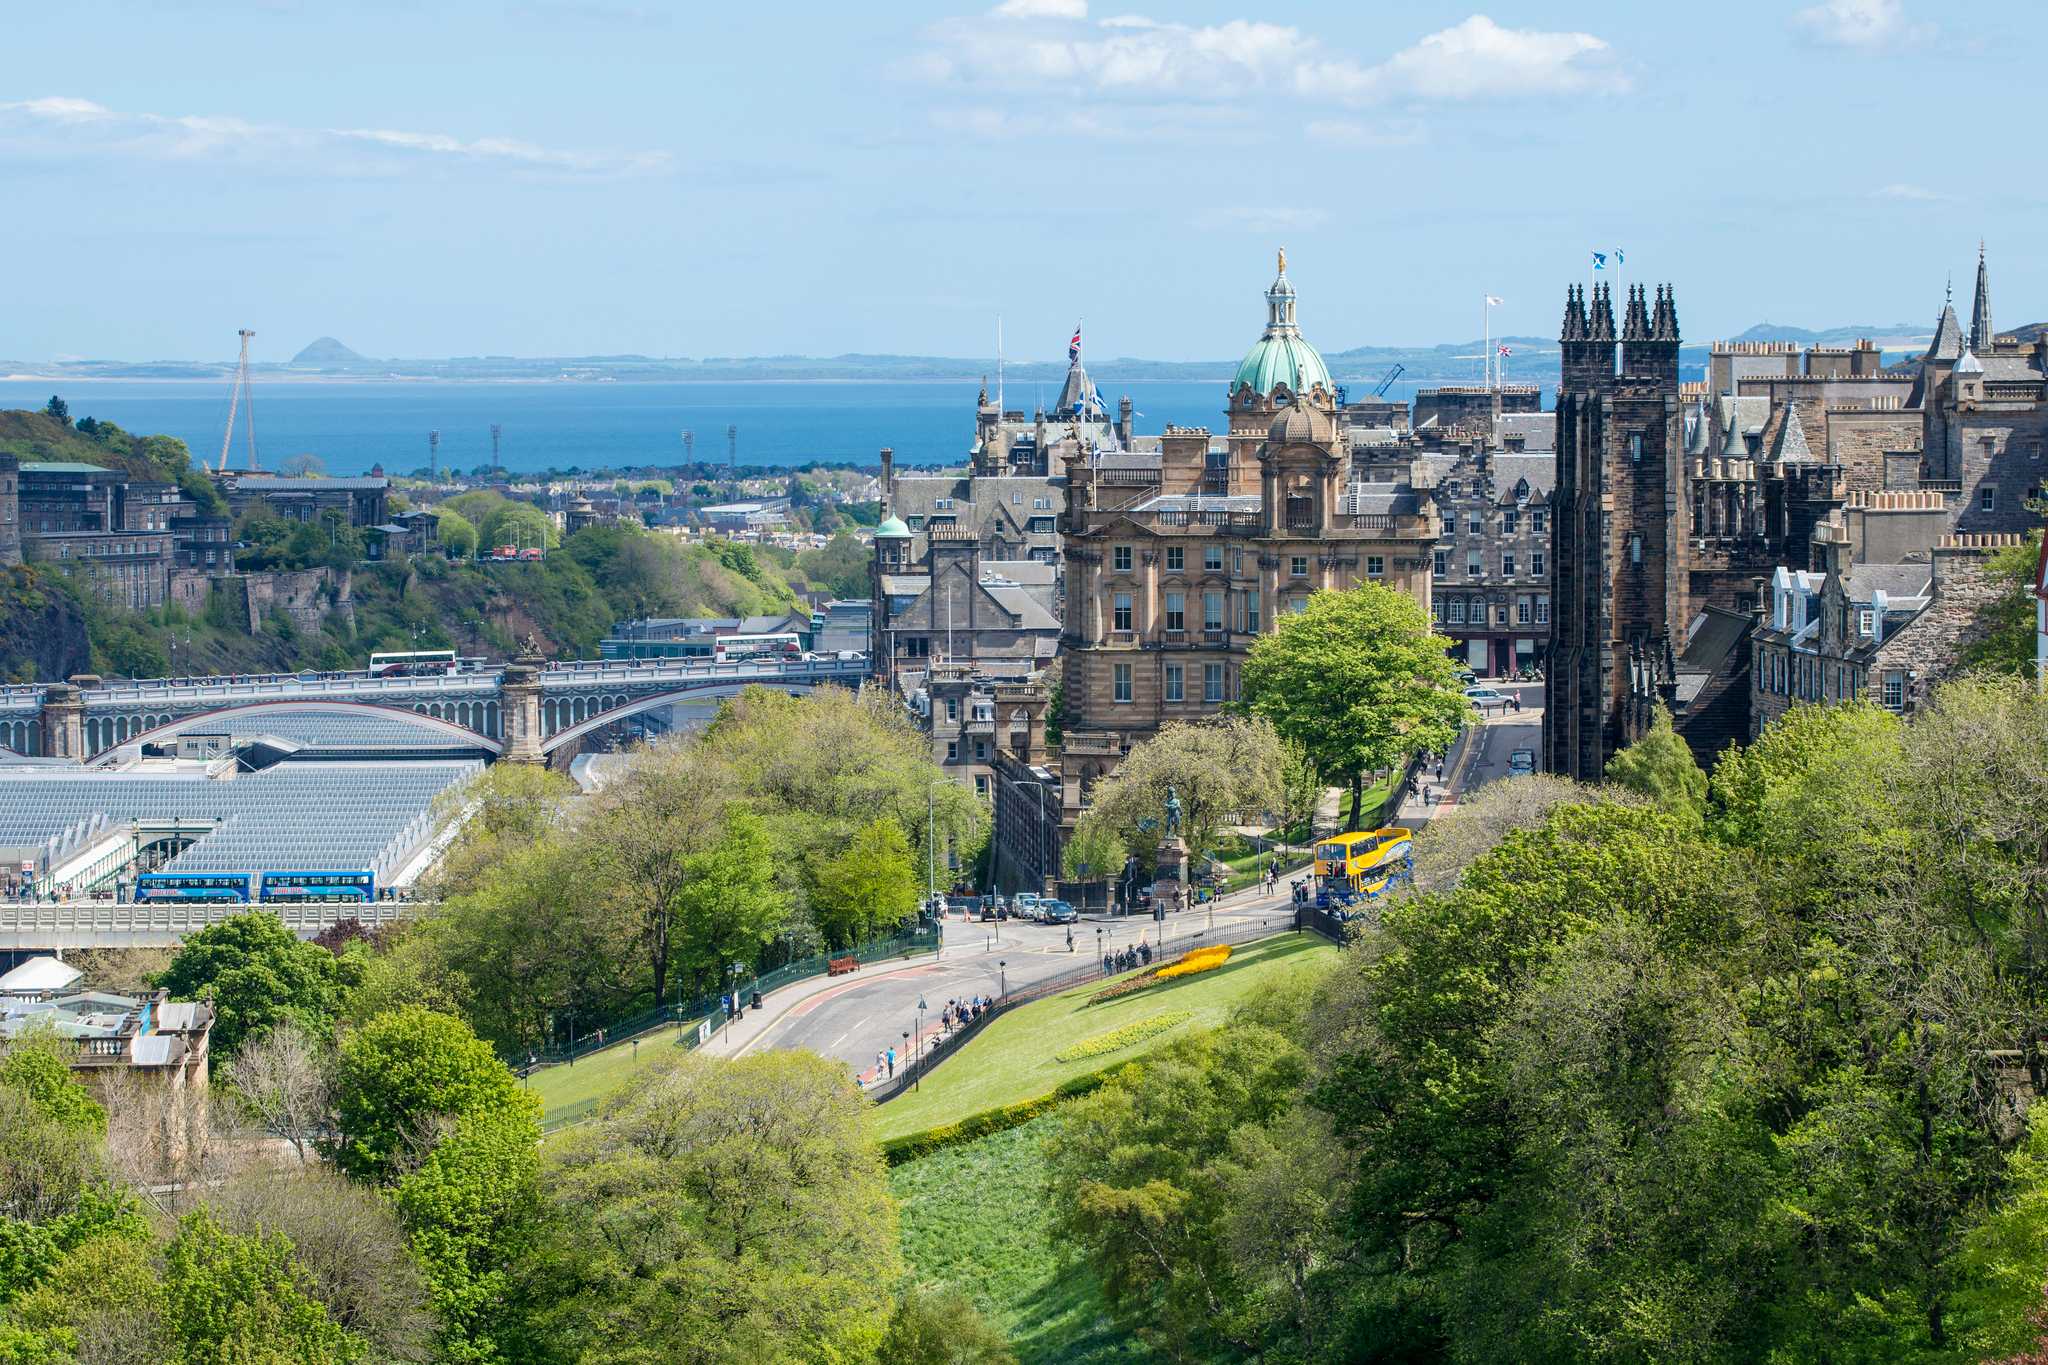 train tours from london to scotland